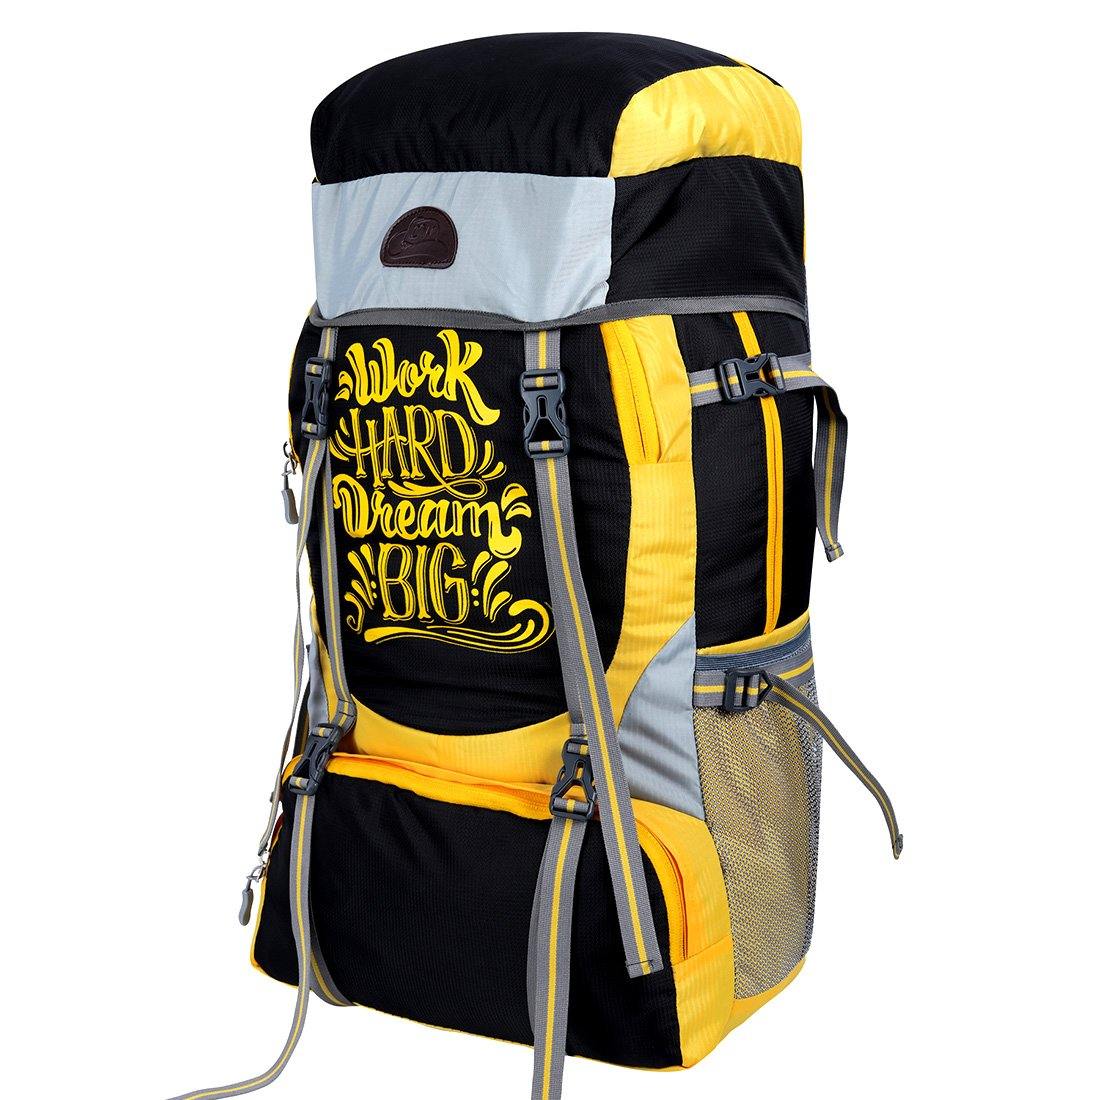 Black & Yellow Casual Trekking Rucksack Bag With Shoe Compartment